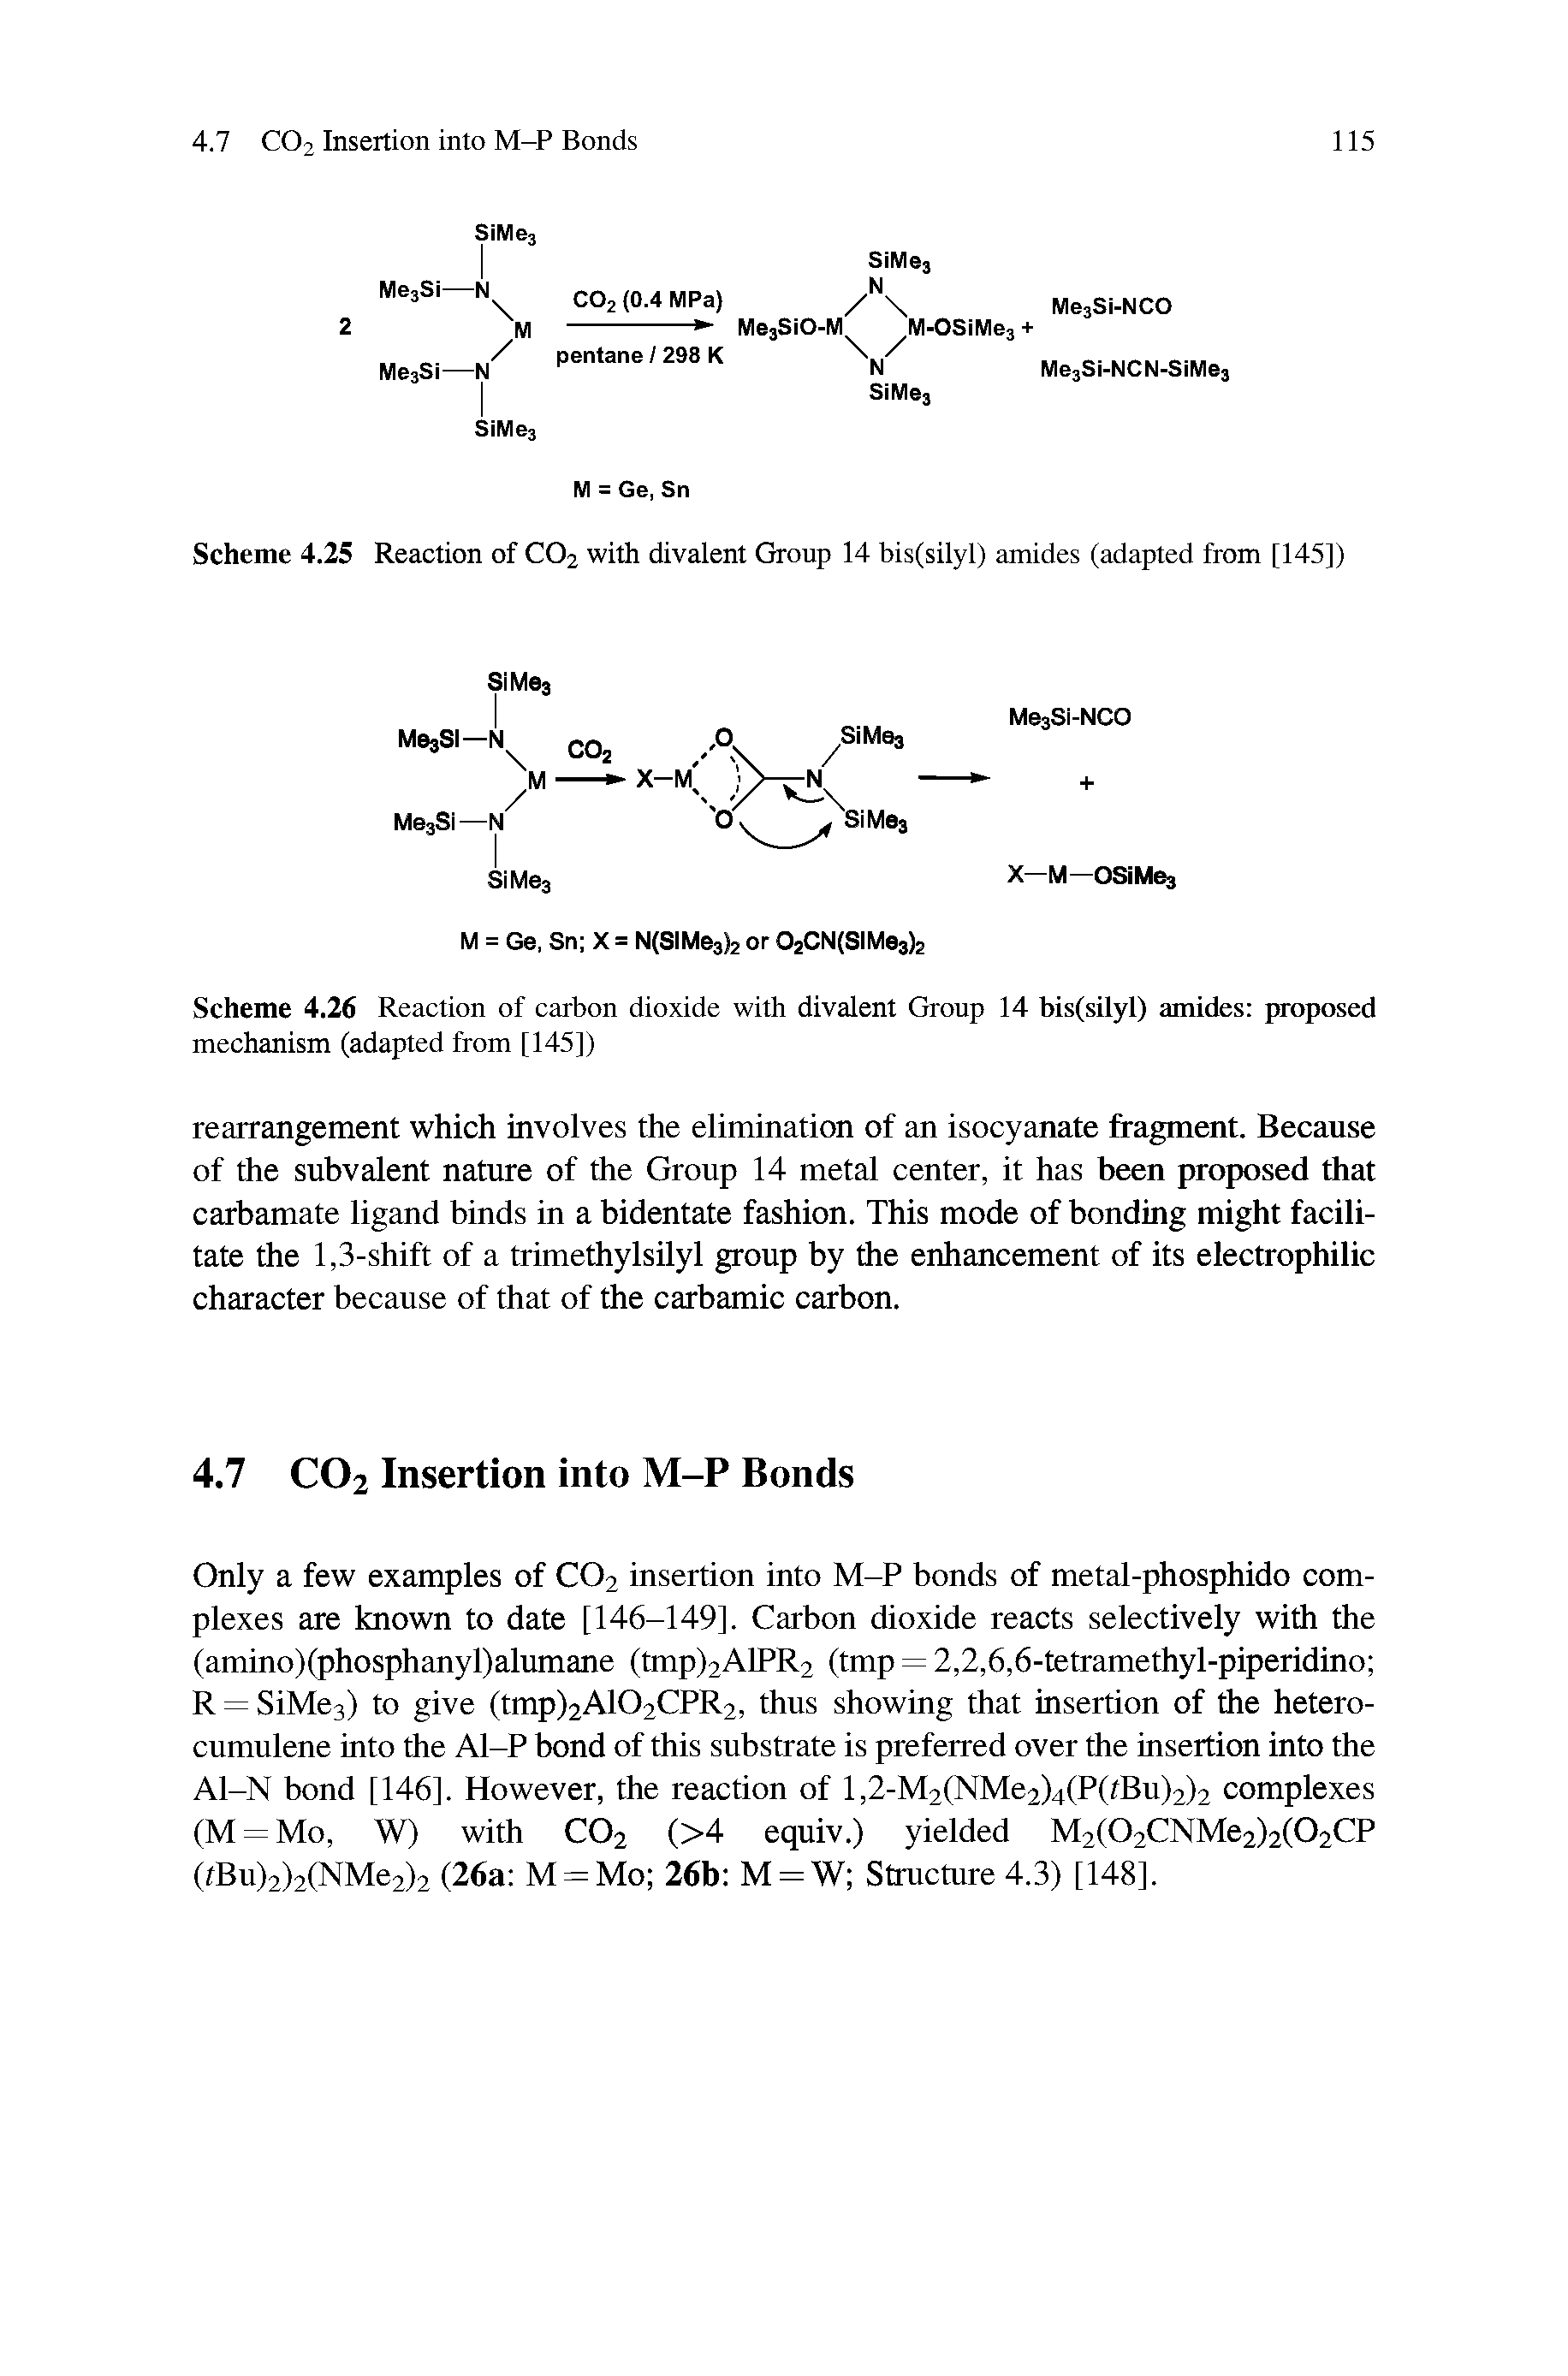 Scheme 4.26 Reaction of carbon dioxide with divalent Group 14 bis(silyl) amides proposed mechanism (adapted from [145])...